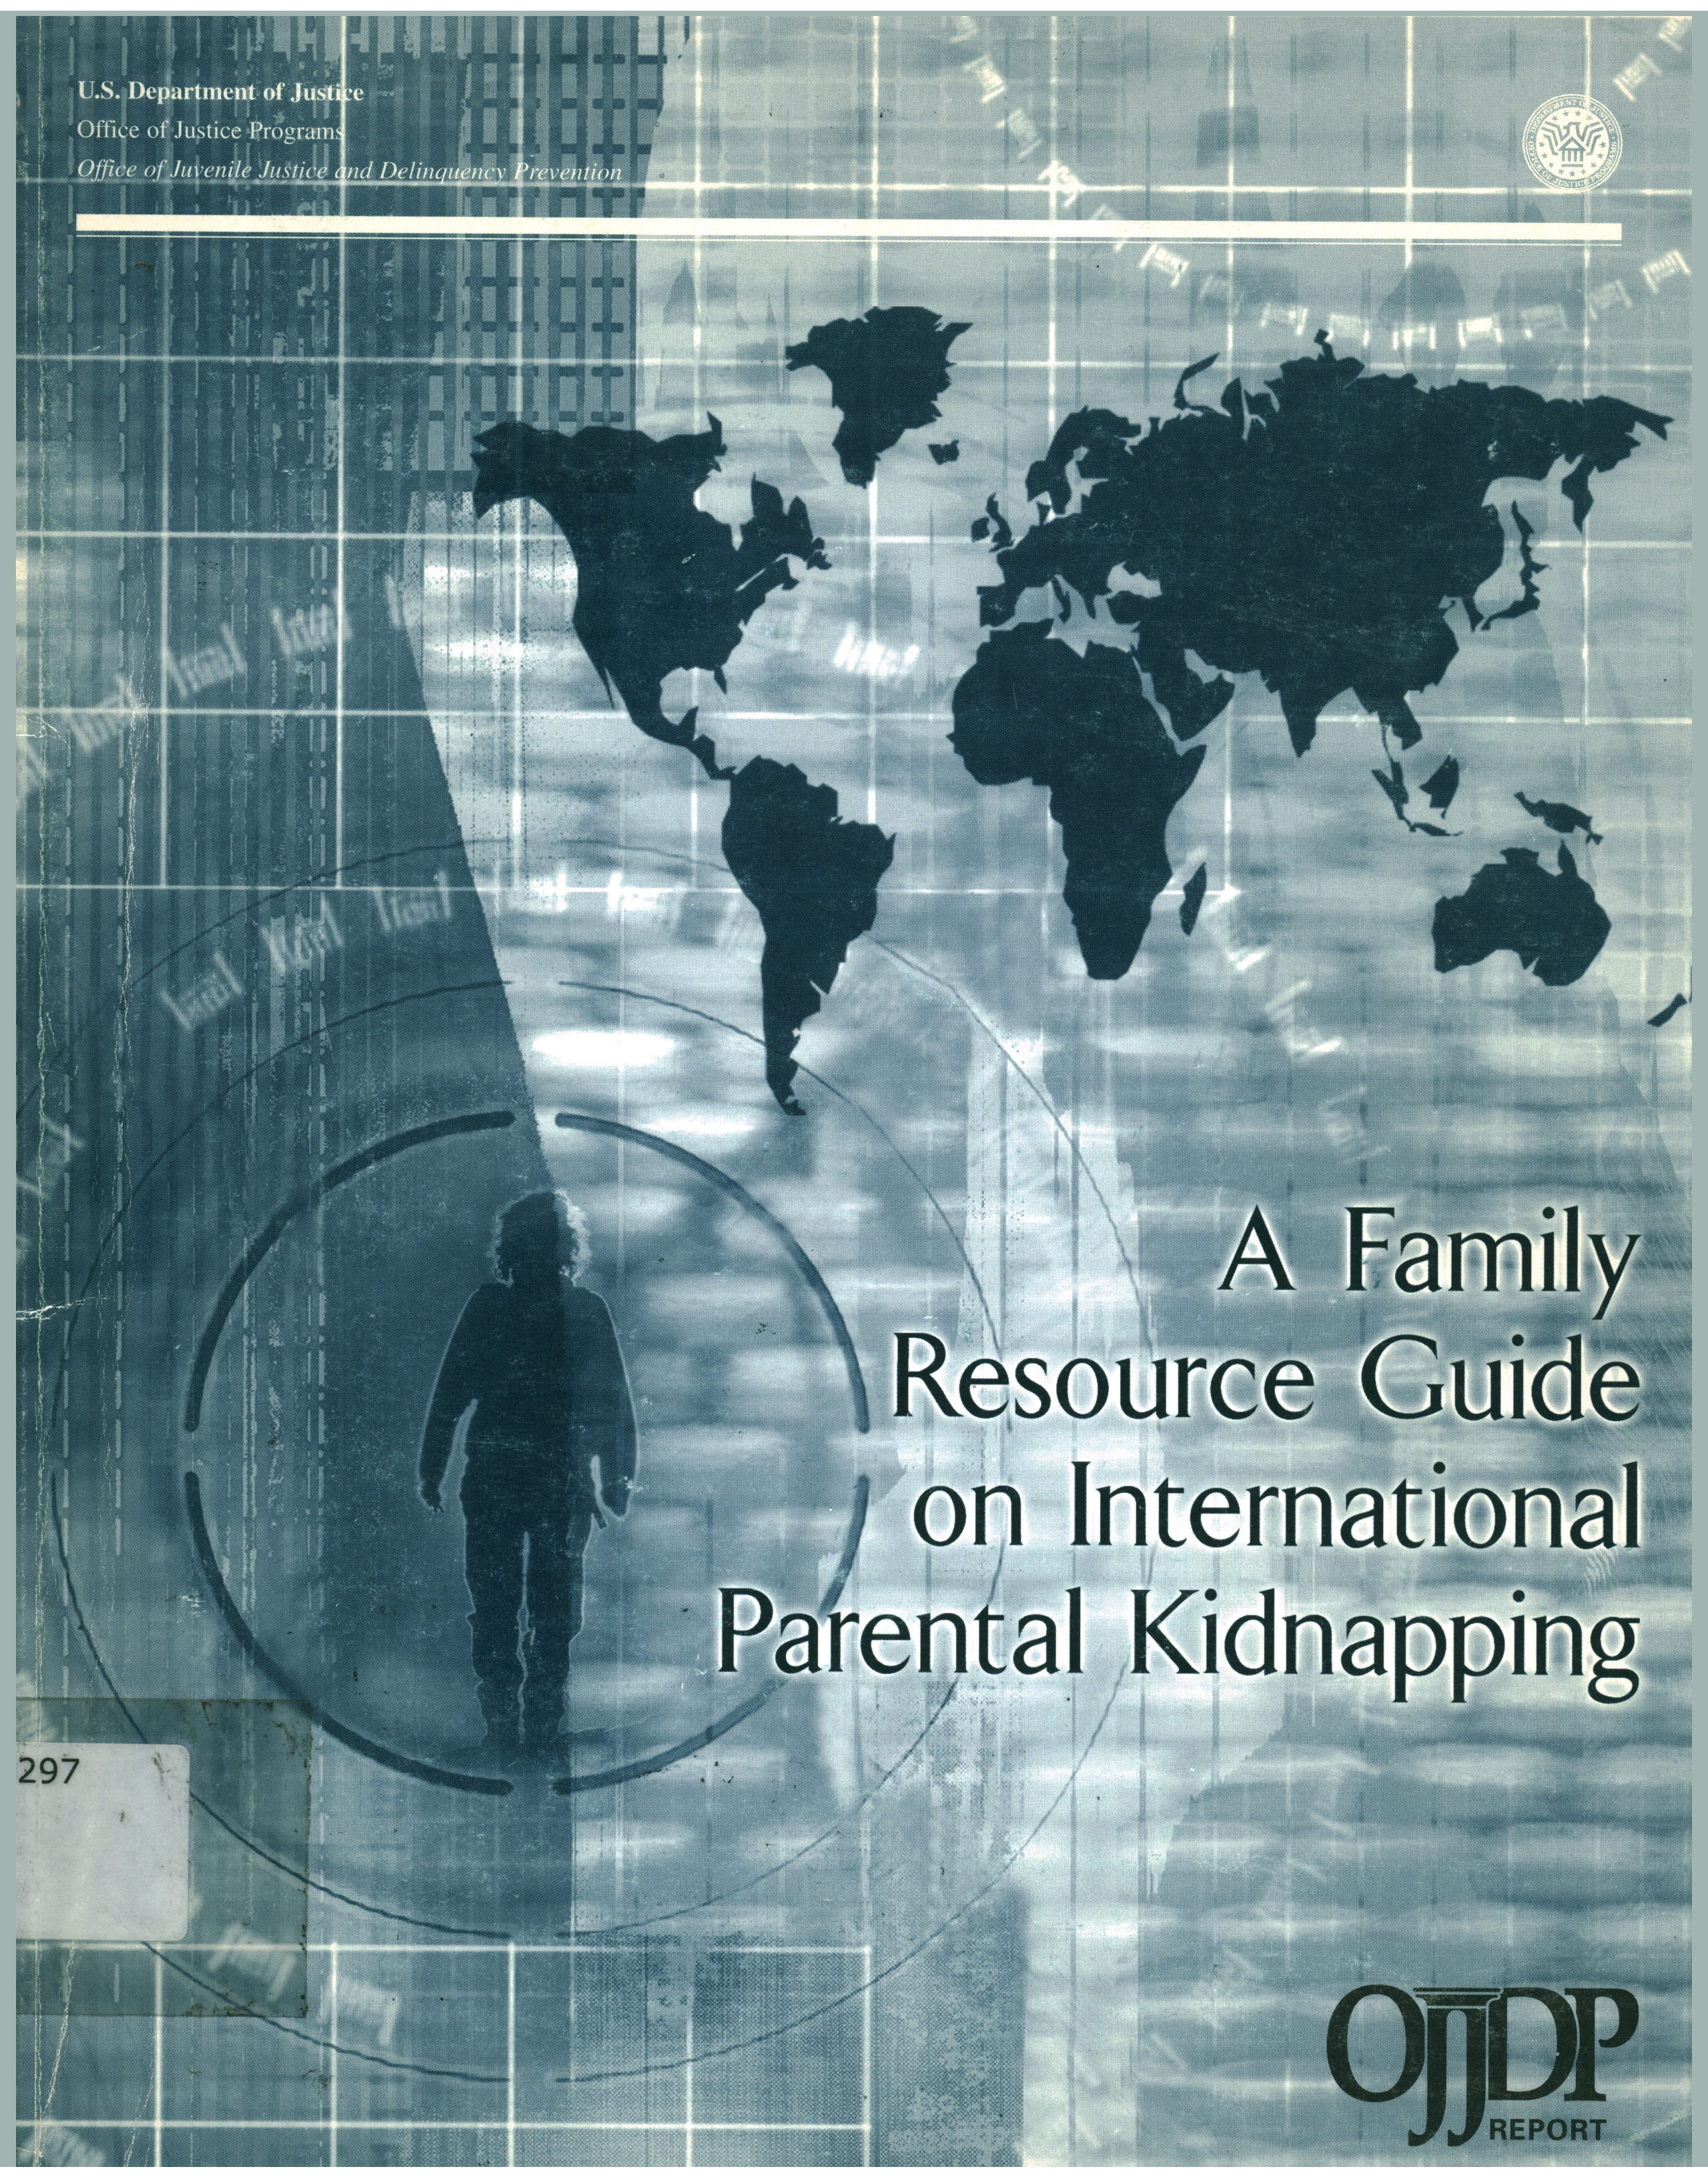 A family resource guide on international parental kidnapping : report